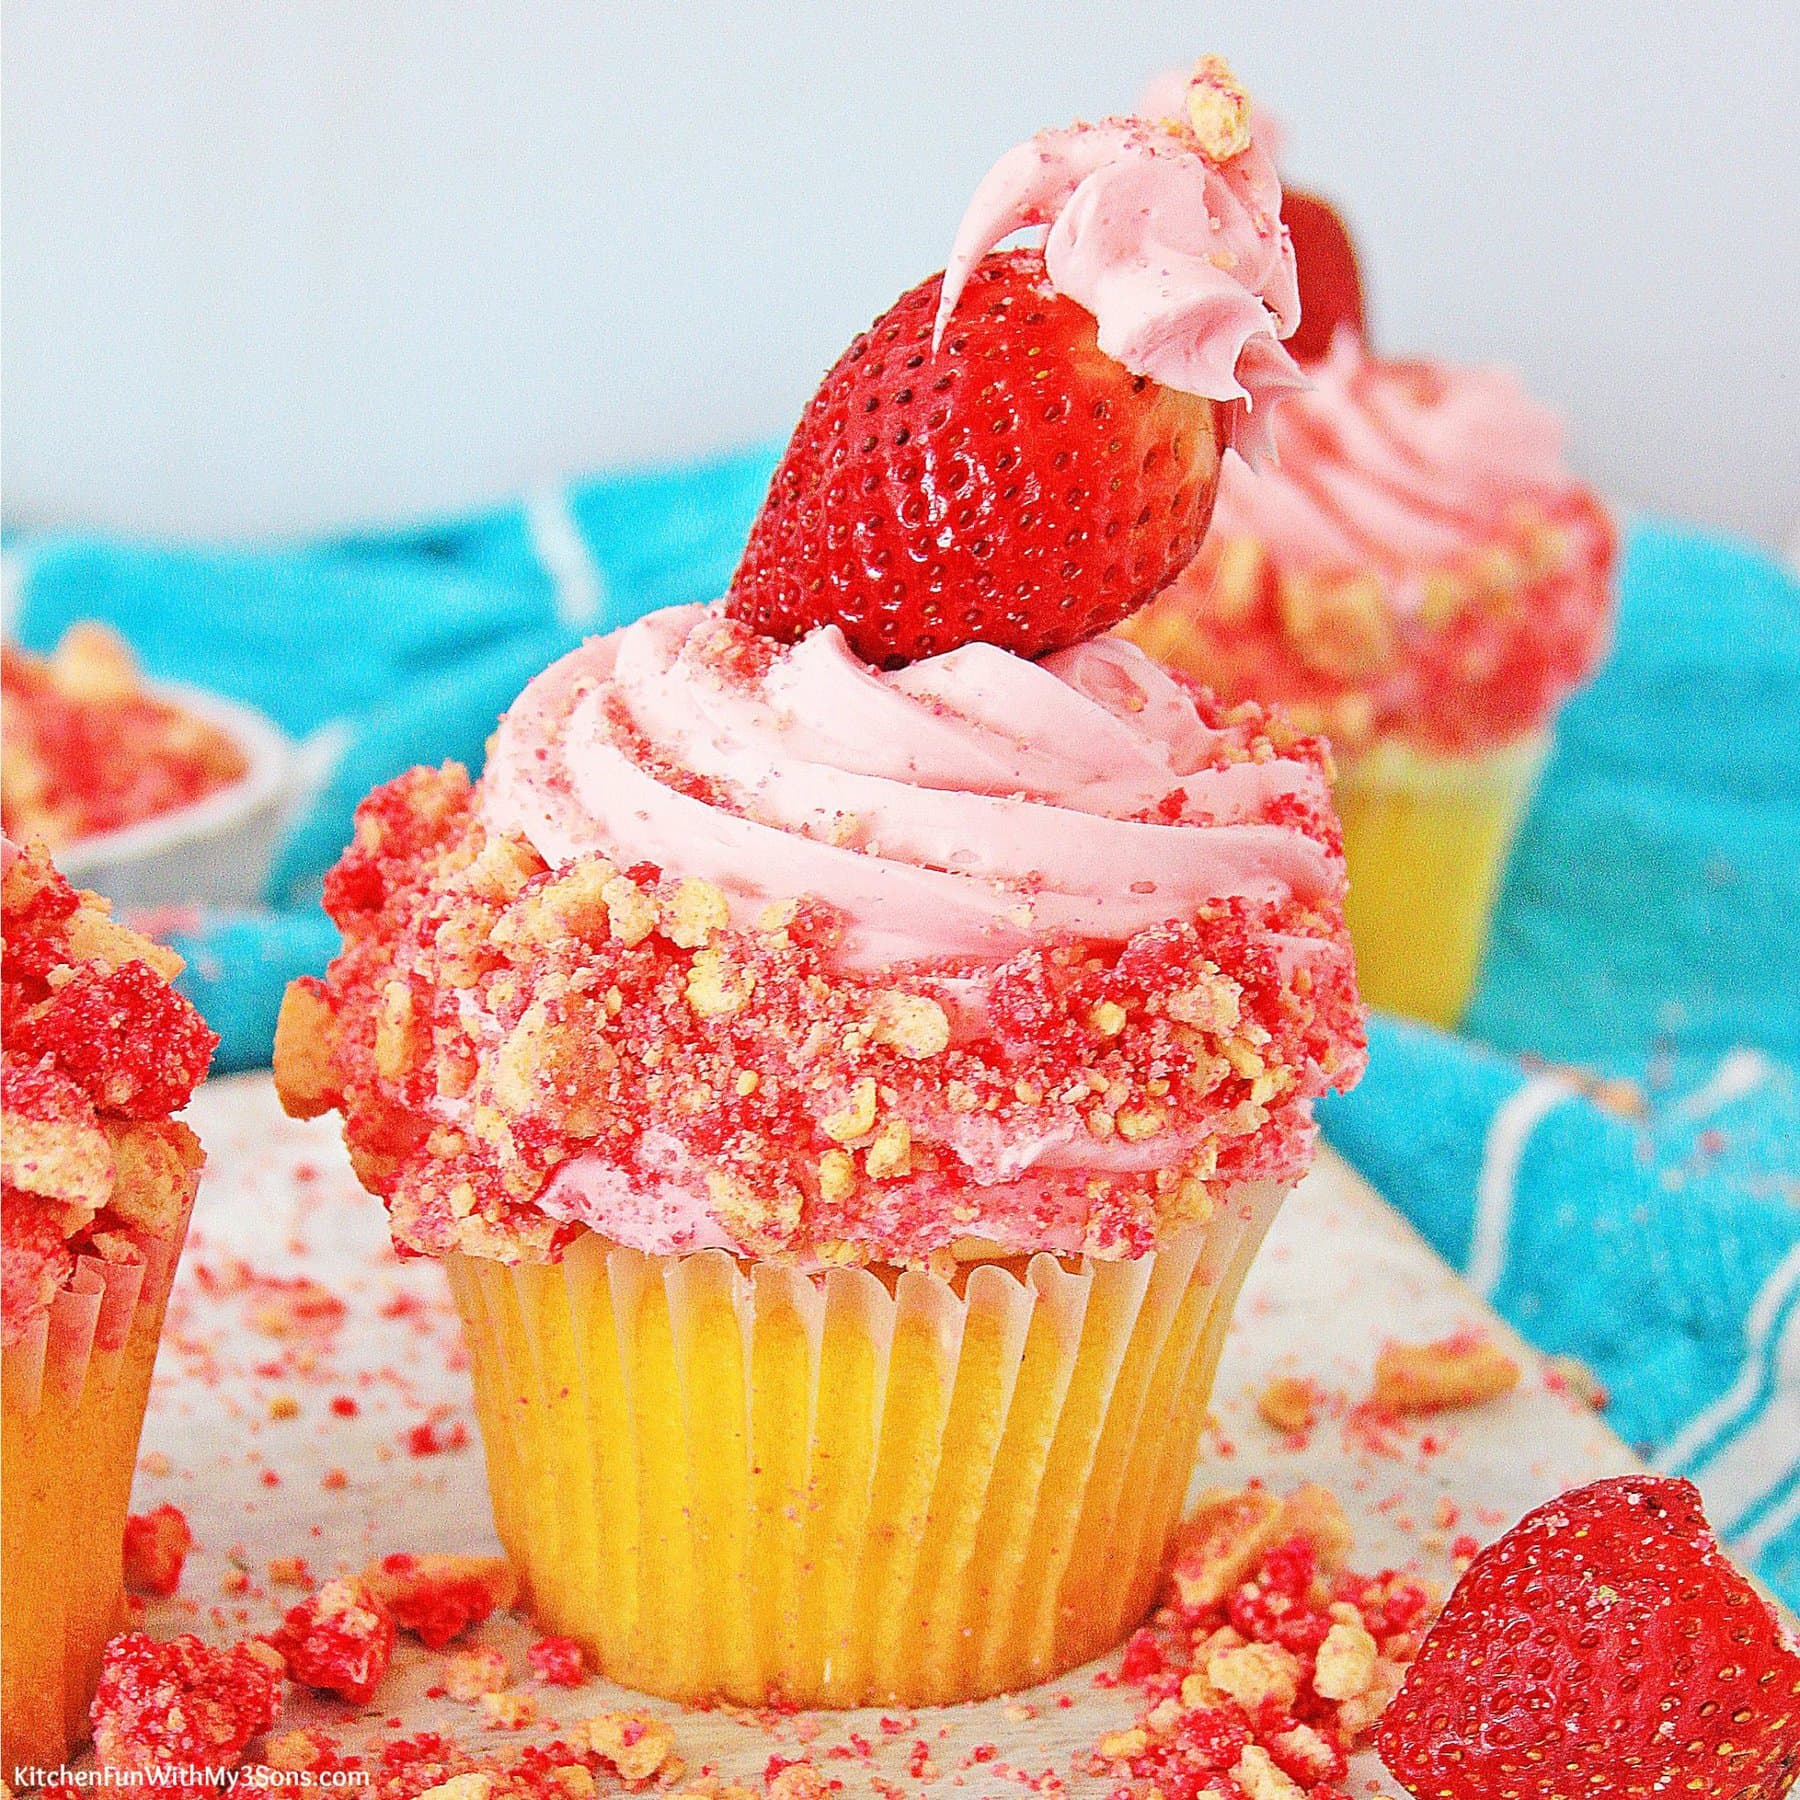 Strawberry crunch cupcake topped with a fresh strawberry